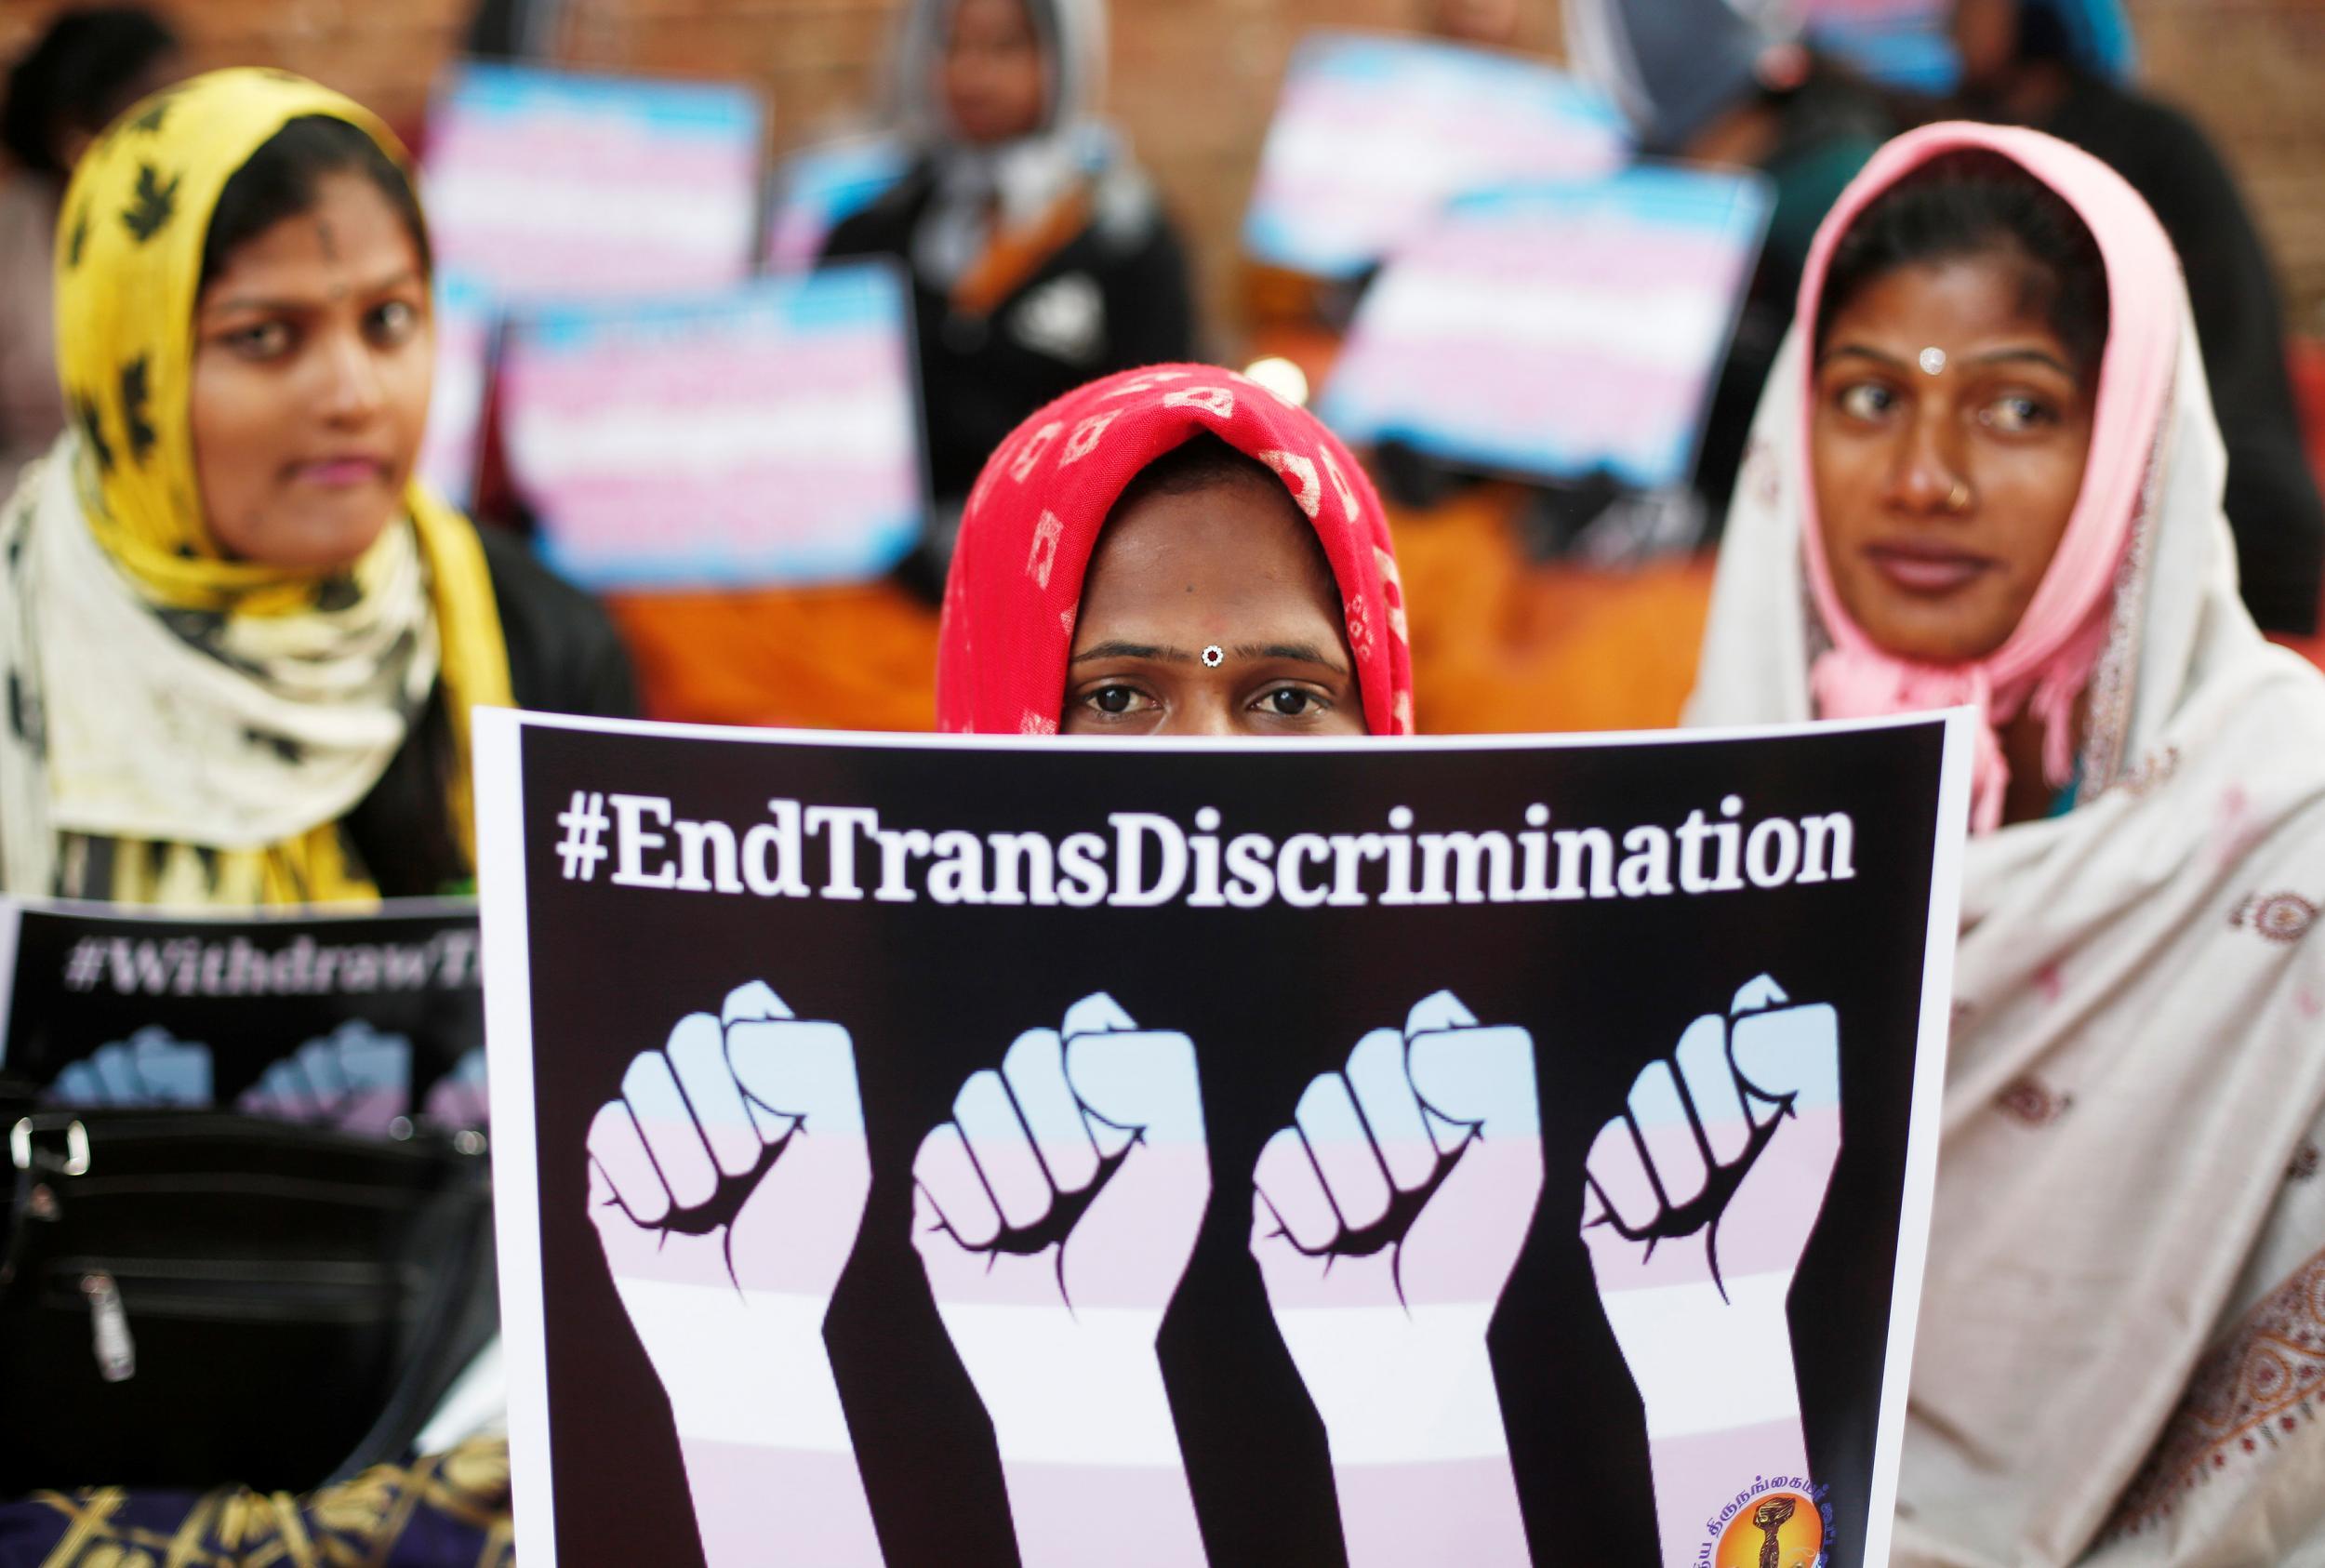 A manual to sensitise teachers on gender non conforming persons has been withdrawn in India